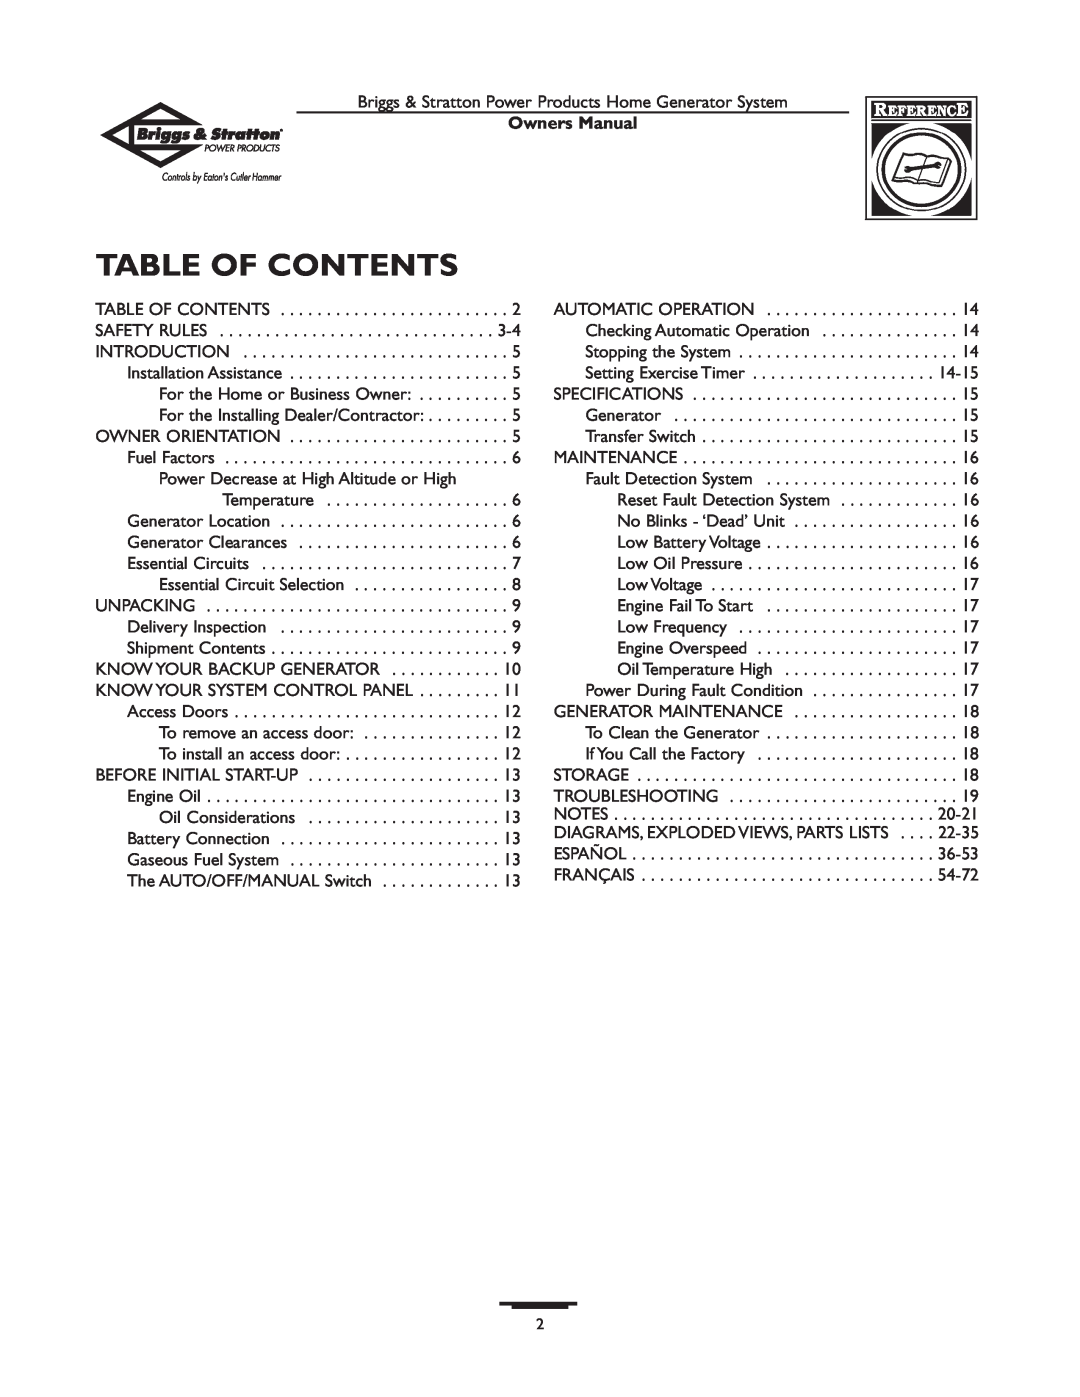 Briggs & Stratton 190839GS owner manual Table Of Contents, Owners Manual 